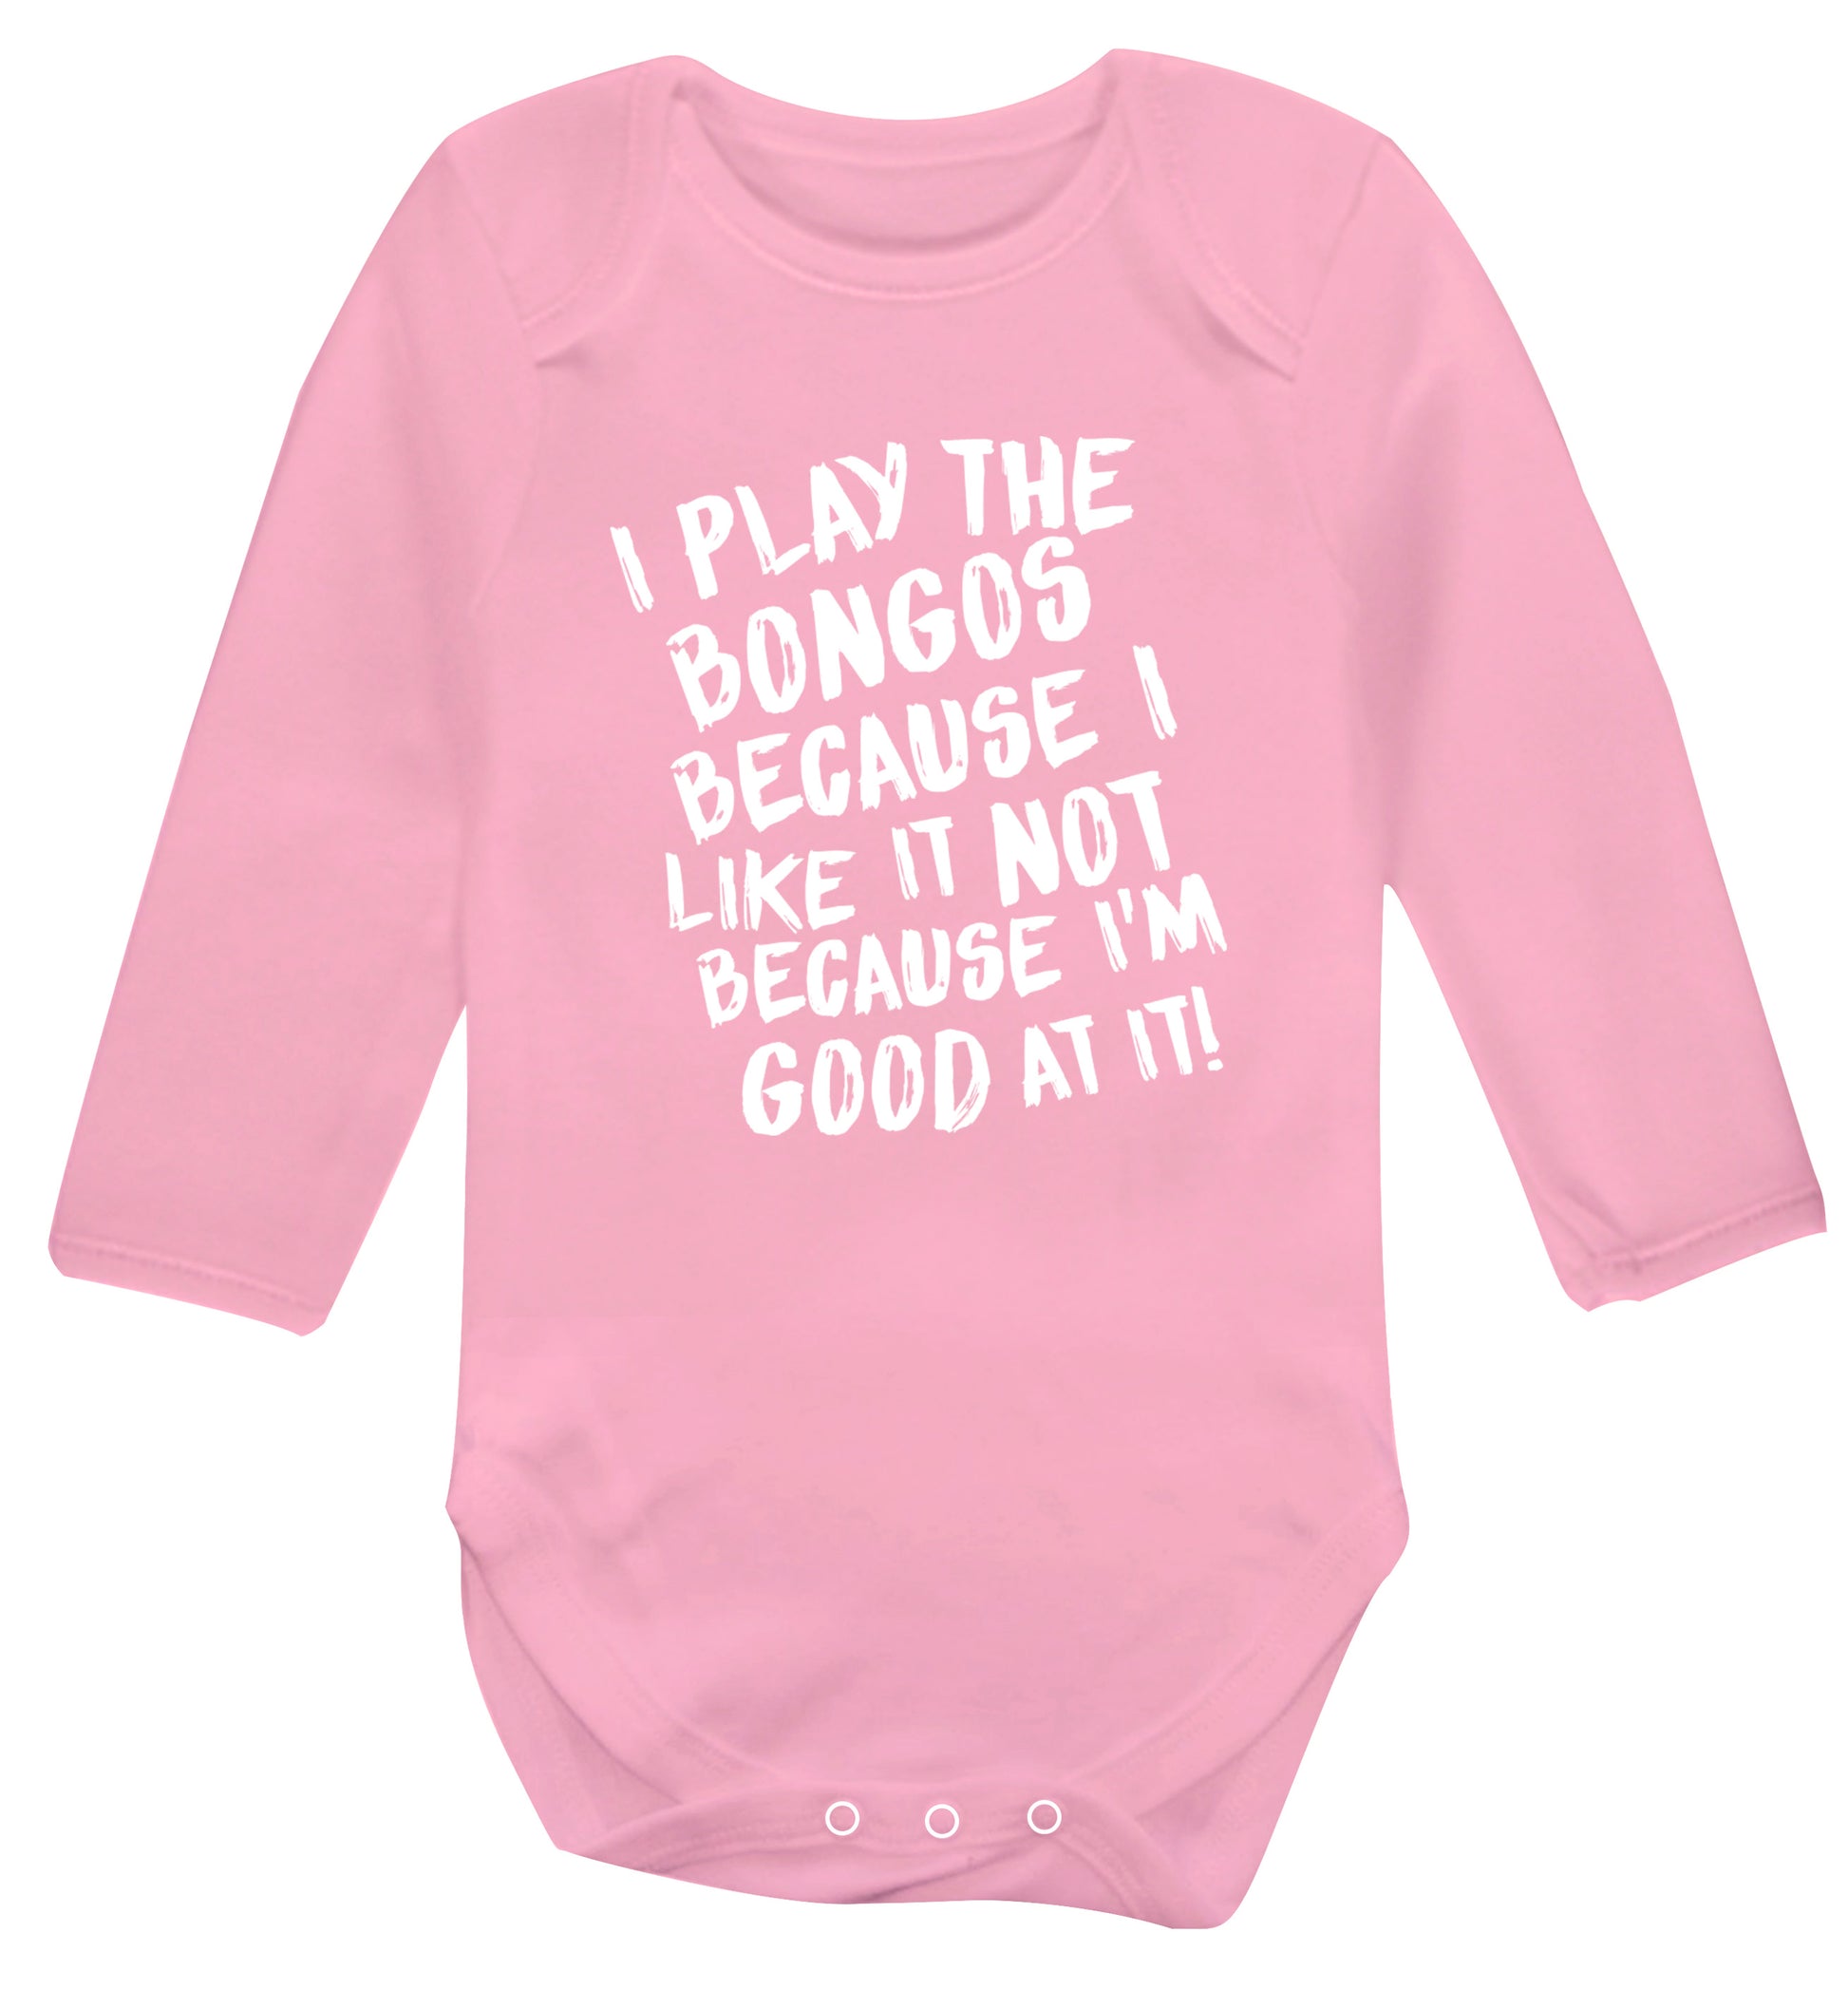 I play the bongos because I like it not because I'm good at it Baby Vest long sleeved pale pink 6-12 months